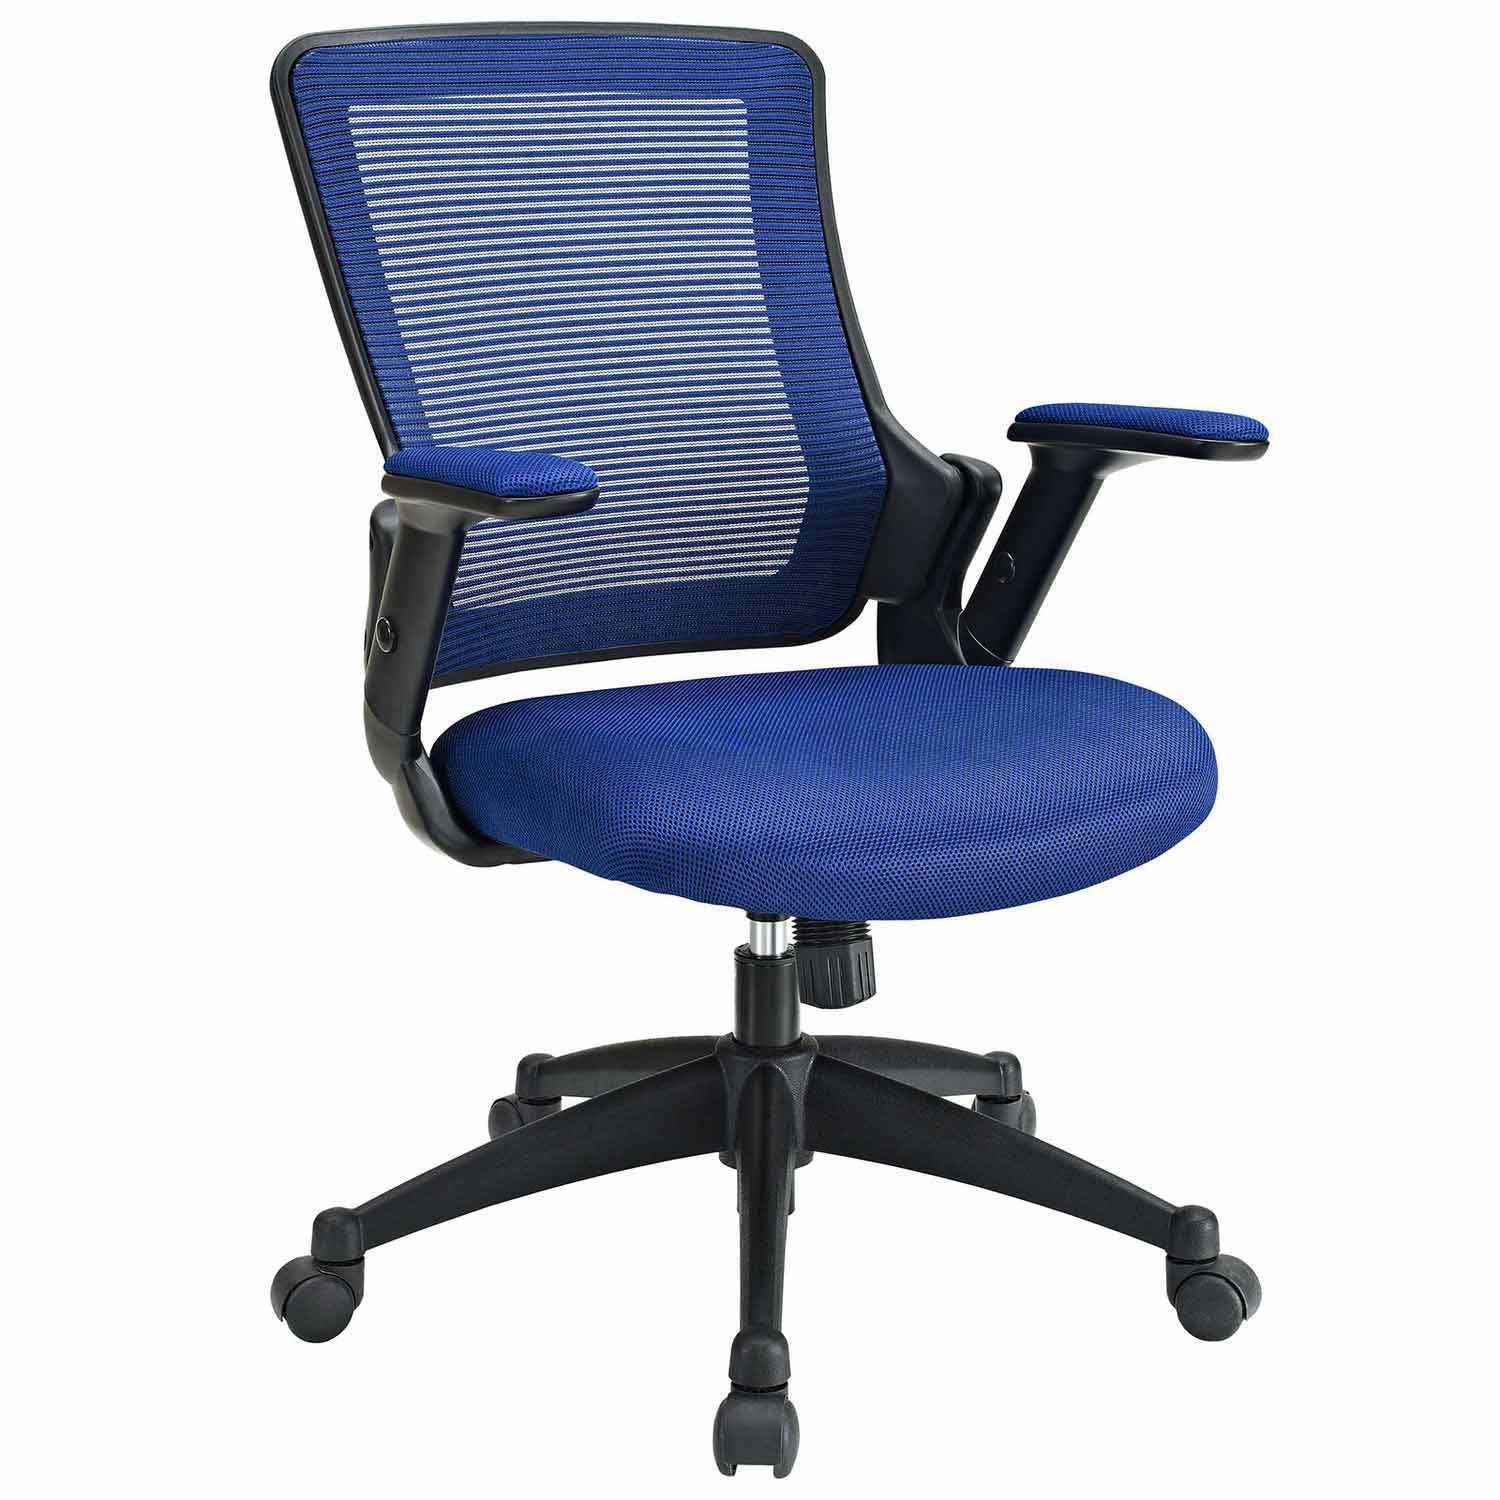 Modway Aspire Fabric Office Chair - Blue